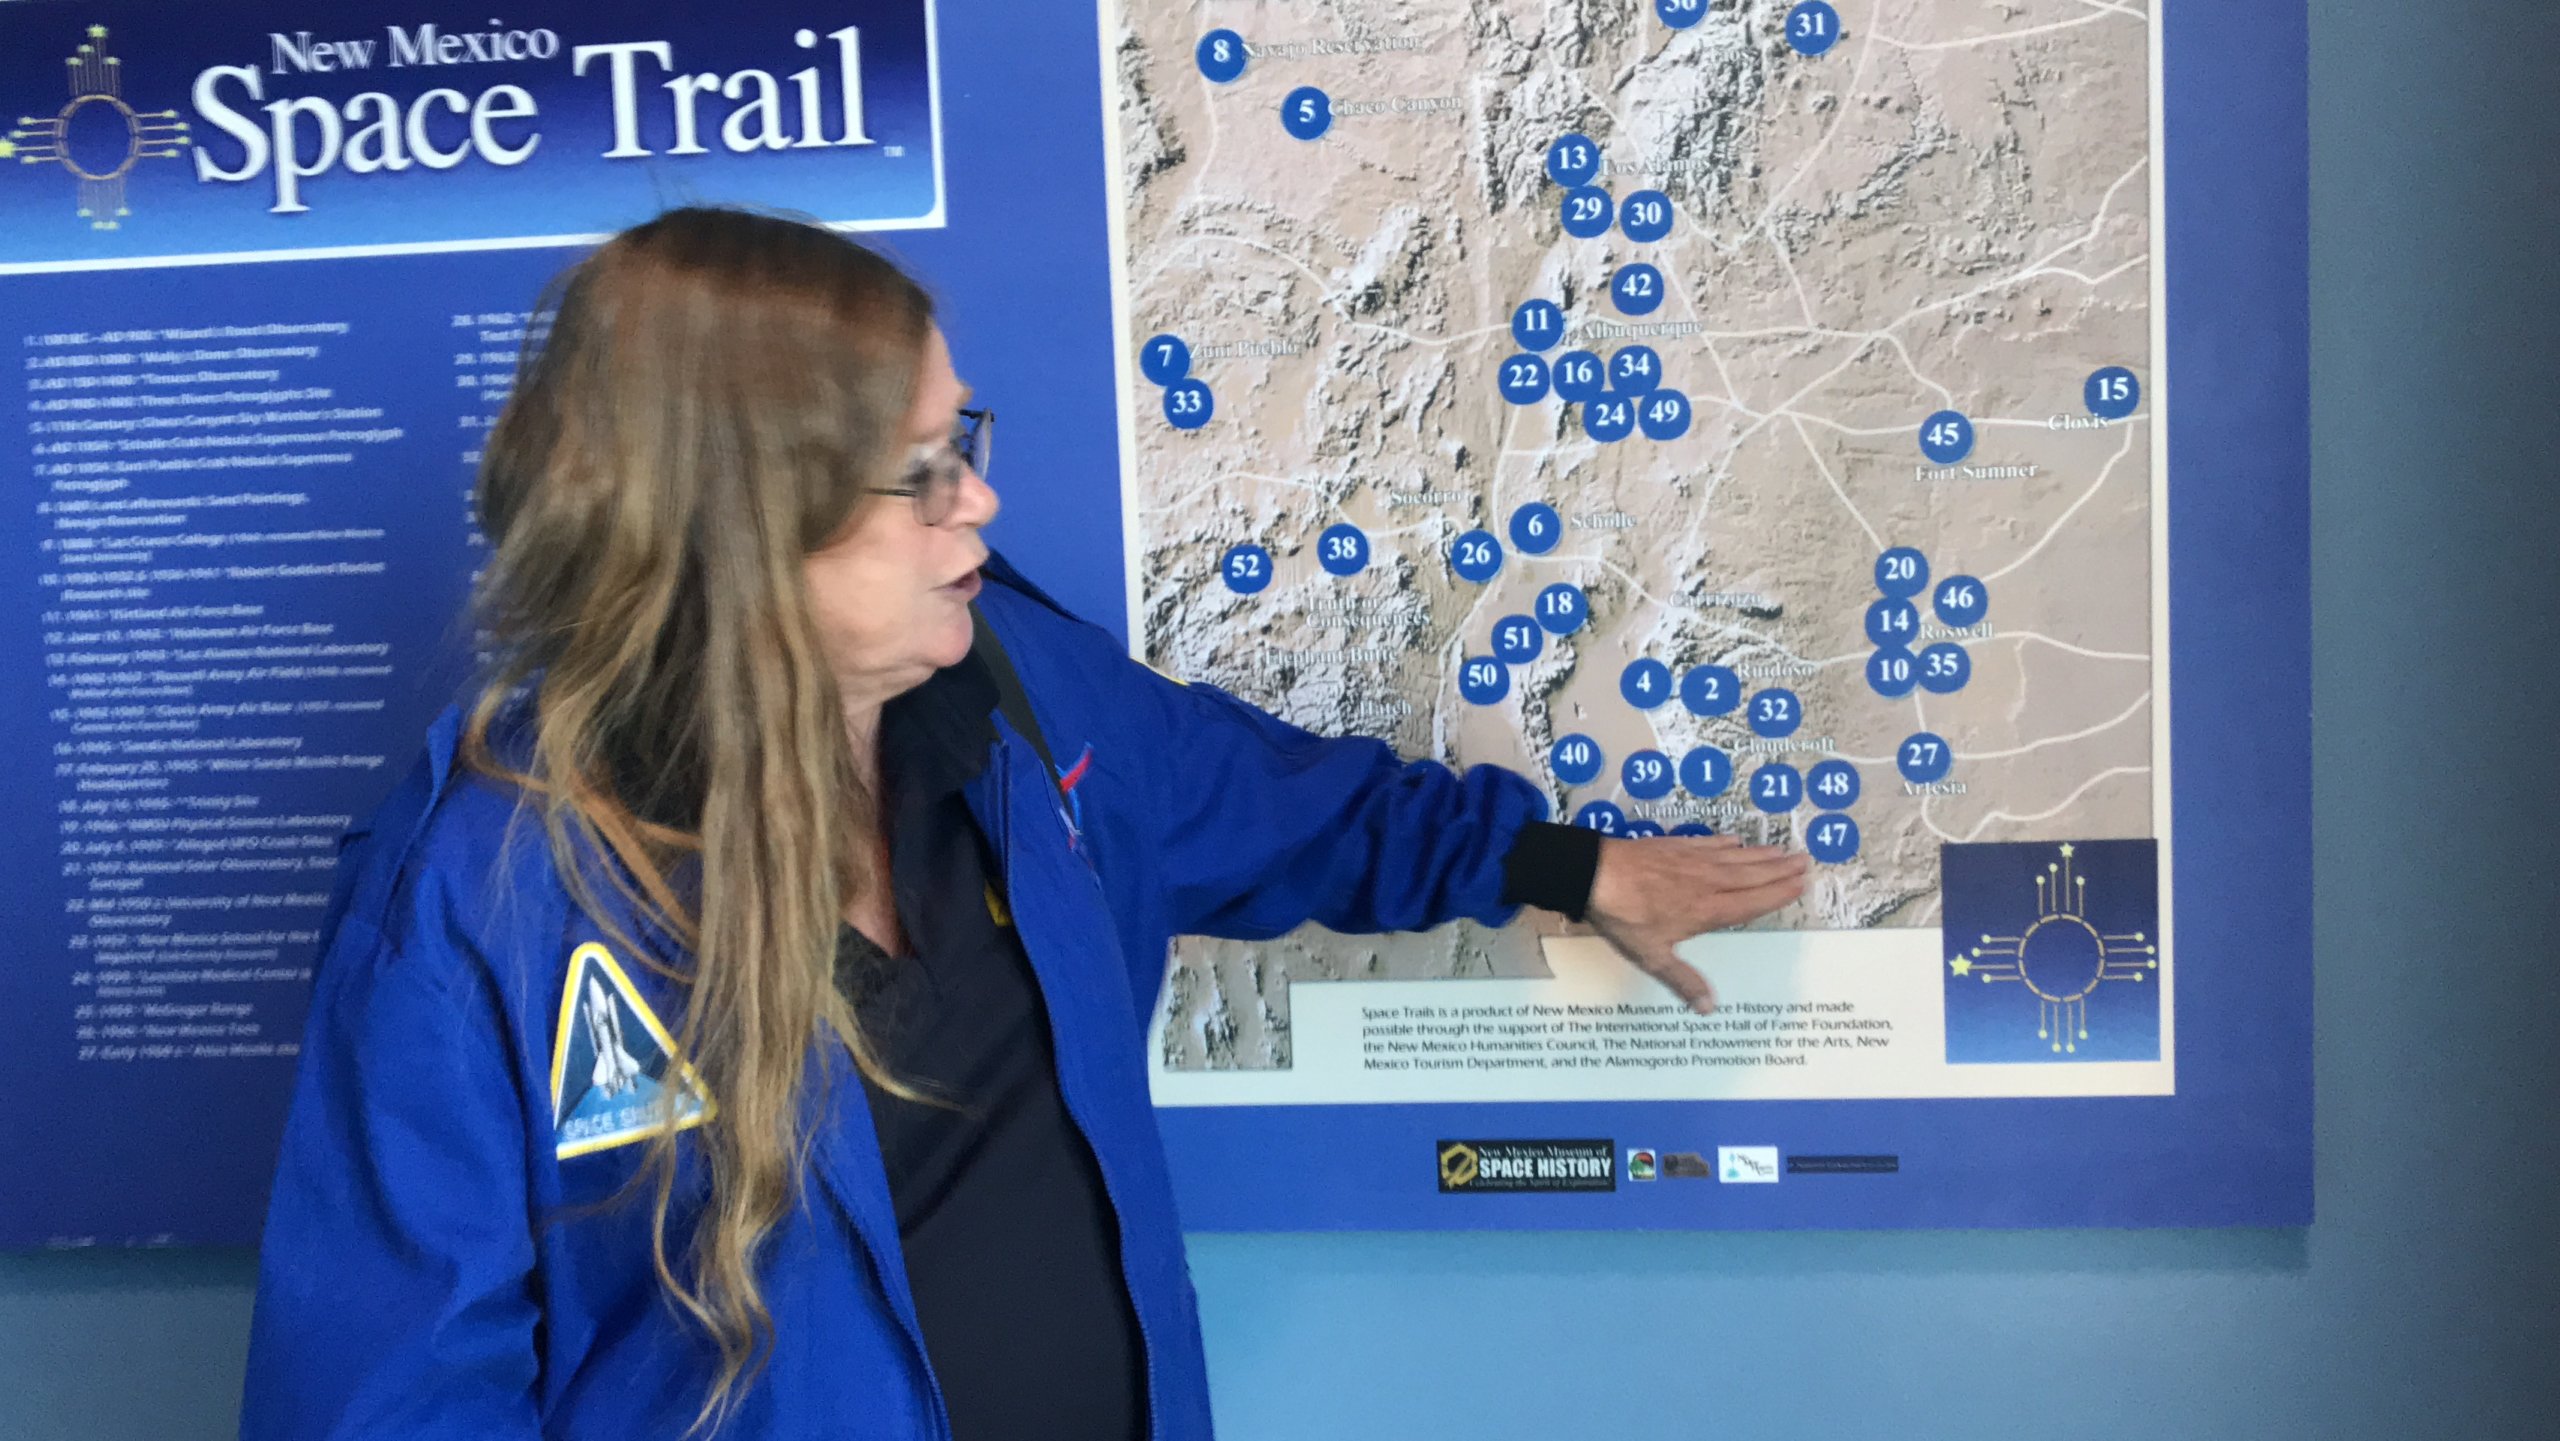 A trail commemorating New Mexico’s history of looking to the stars